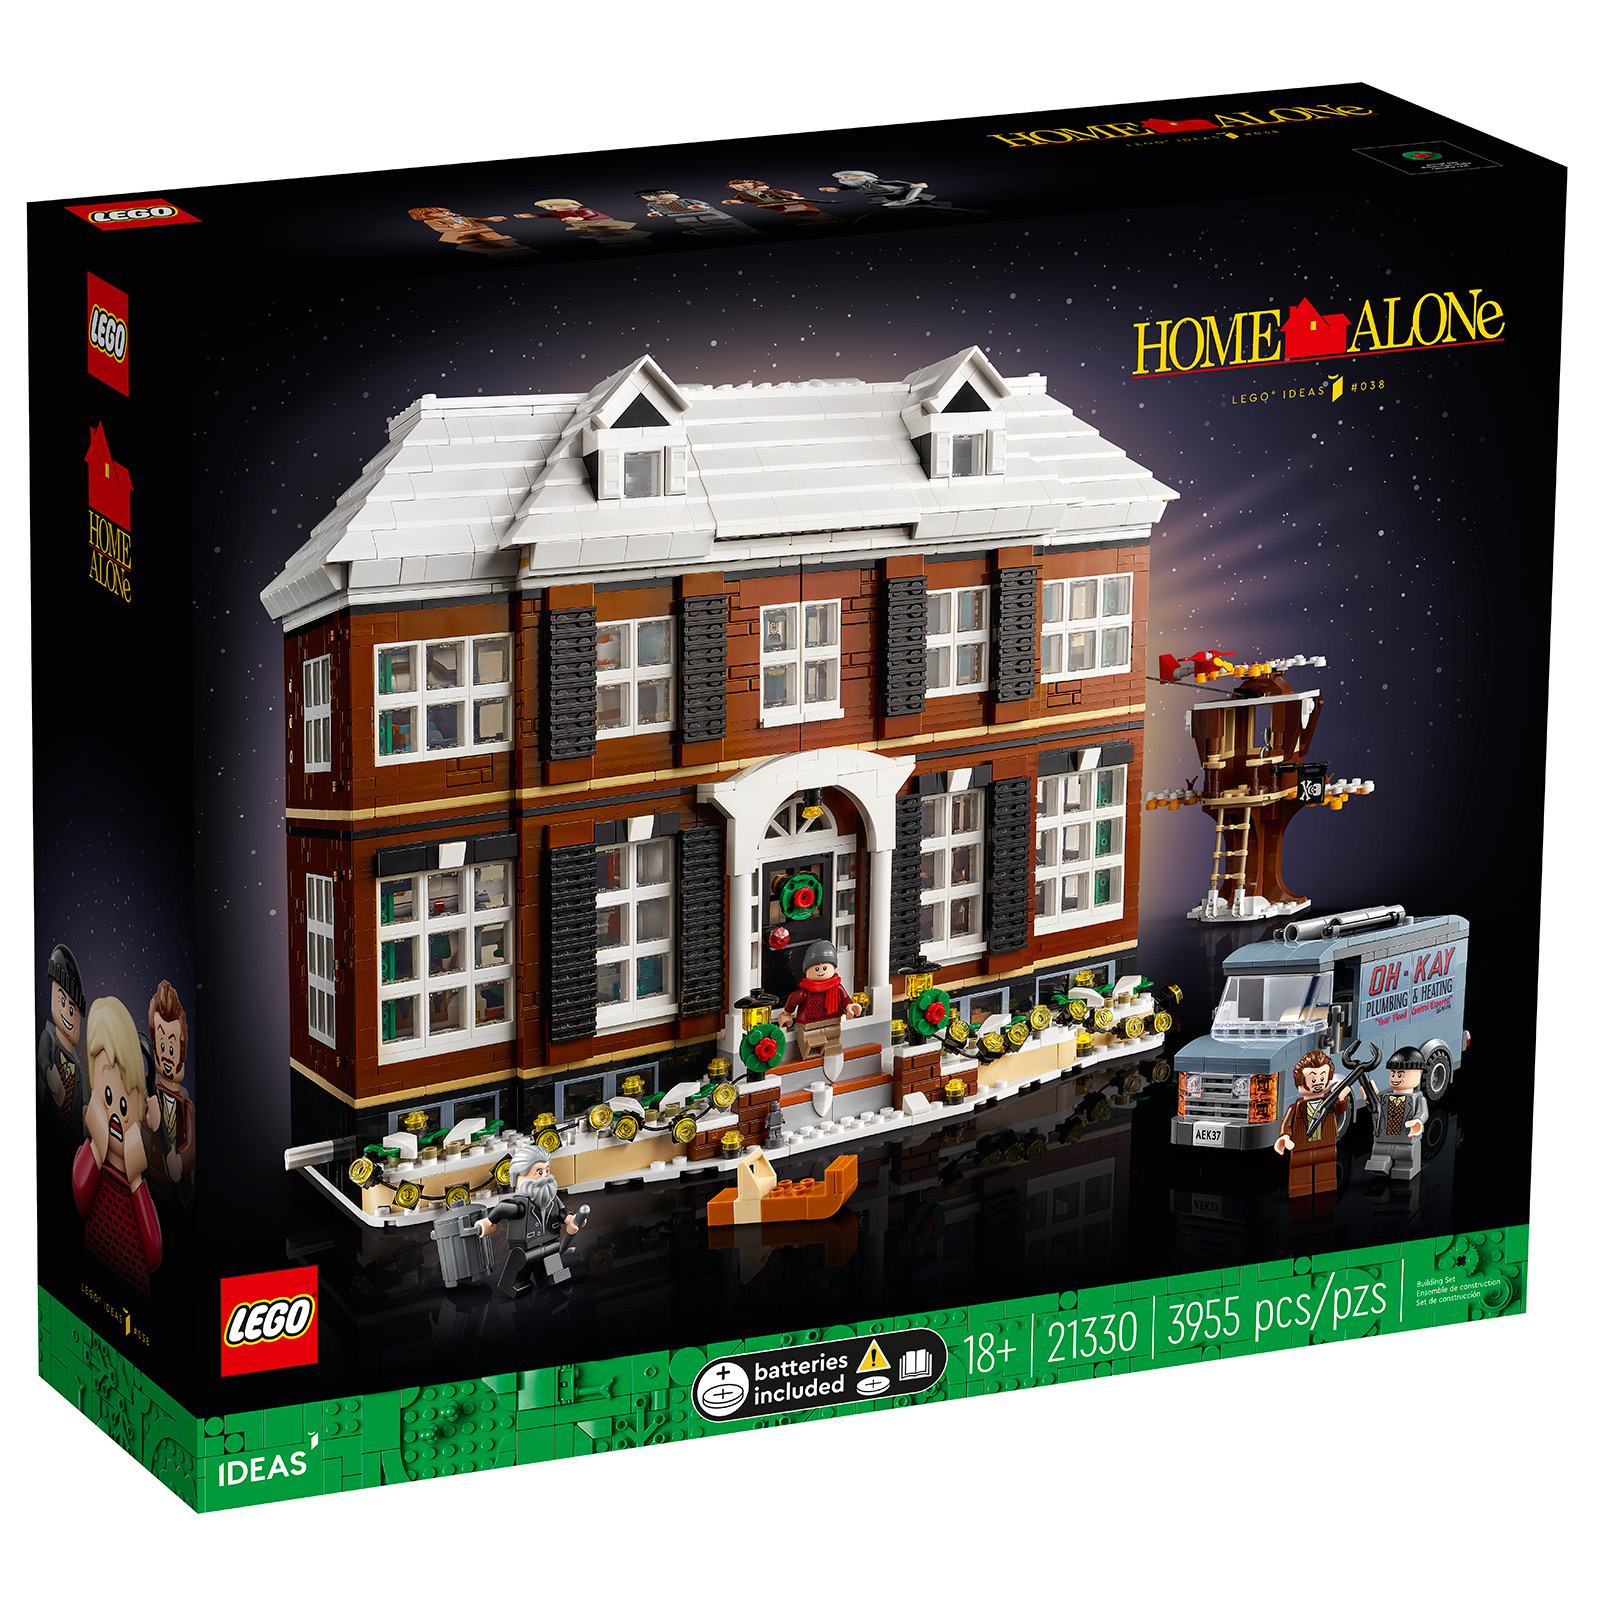 LEGO : Ze topik =) - Page 9 Lego-ideas-21330-home-alone-house-box-front